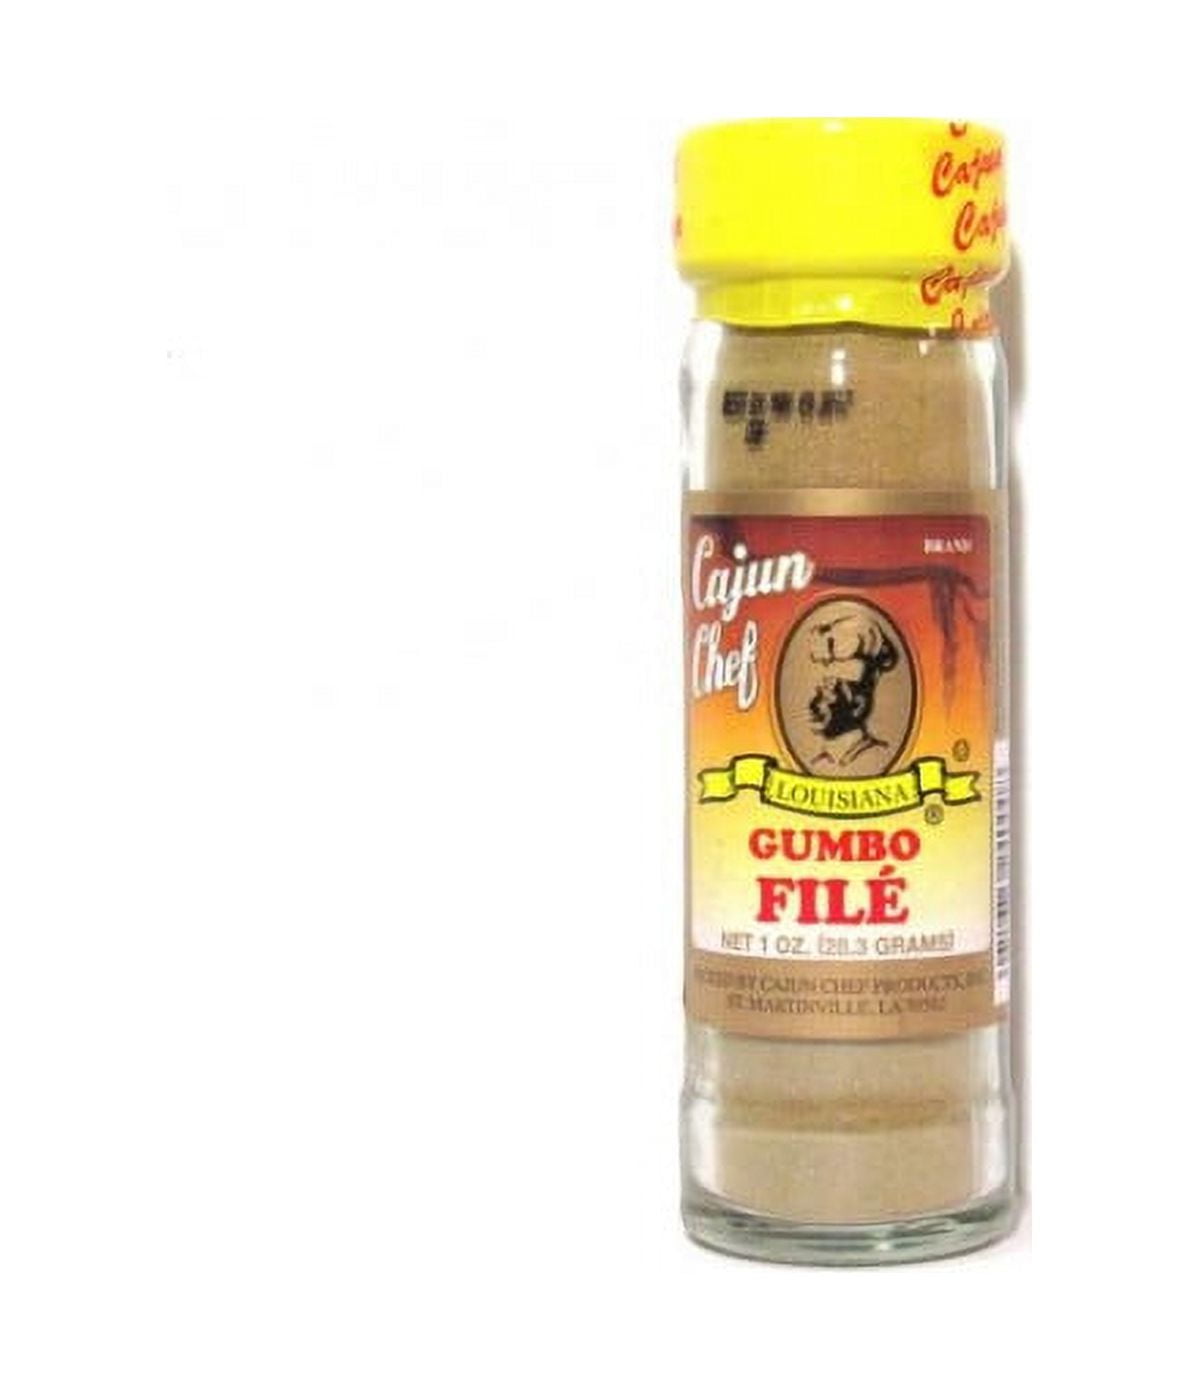 Gumbo File - Flatpack, 1/2 Cup - The Spice House